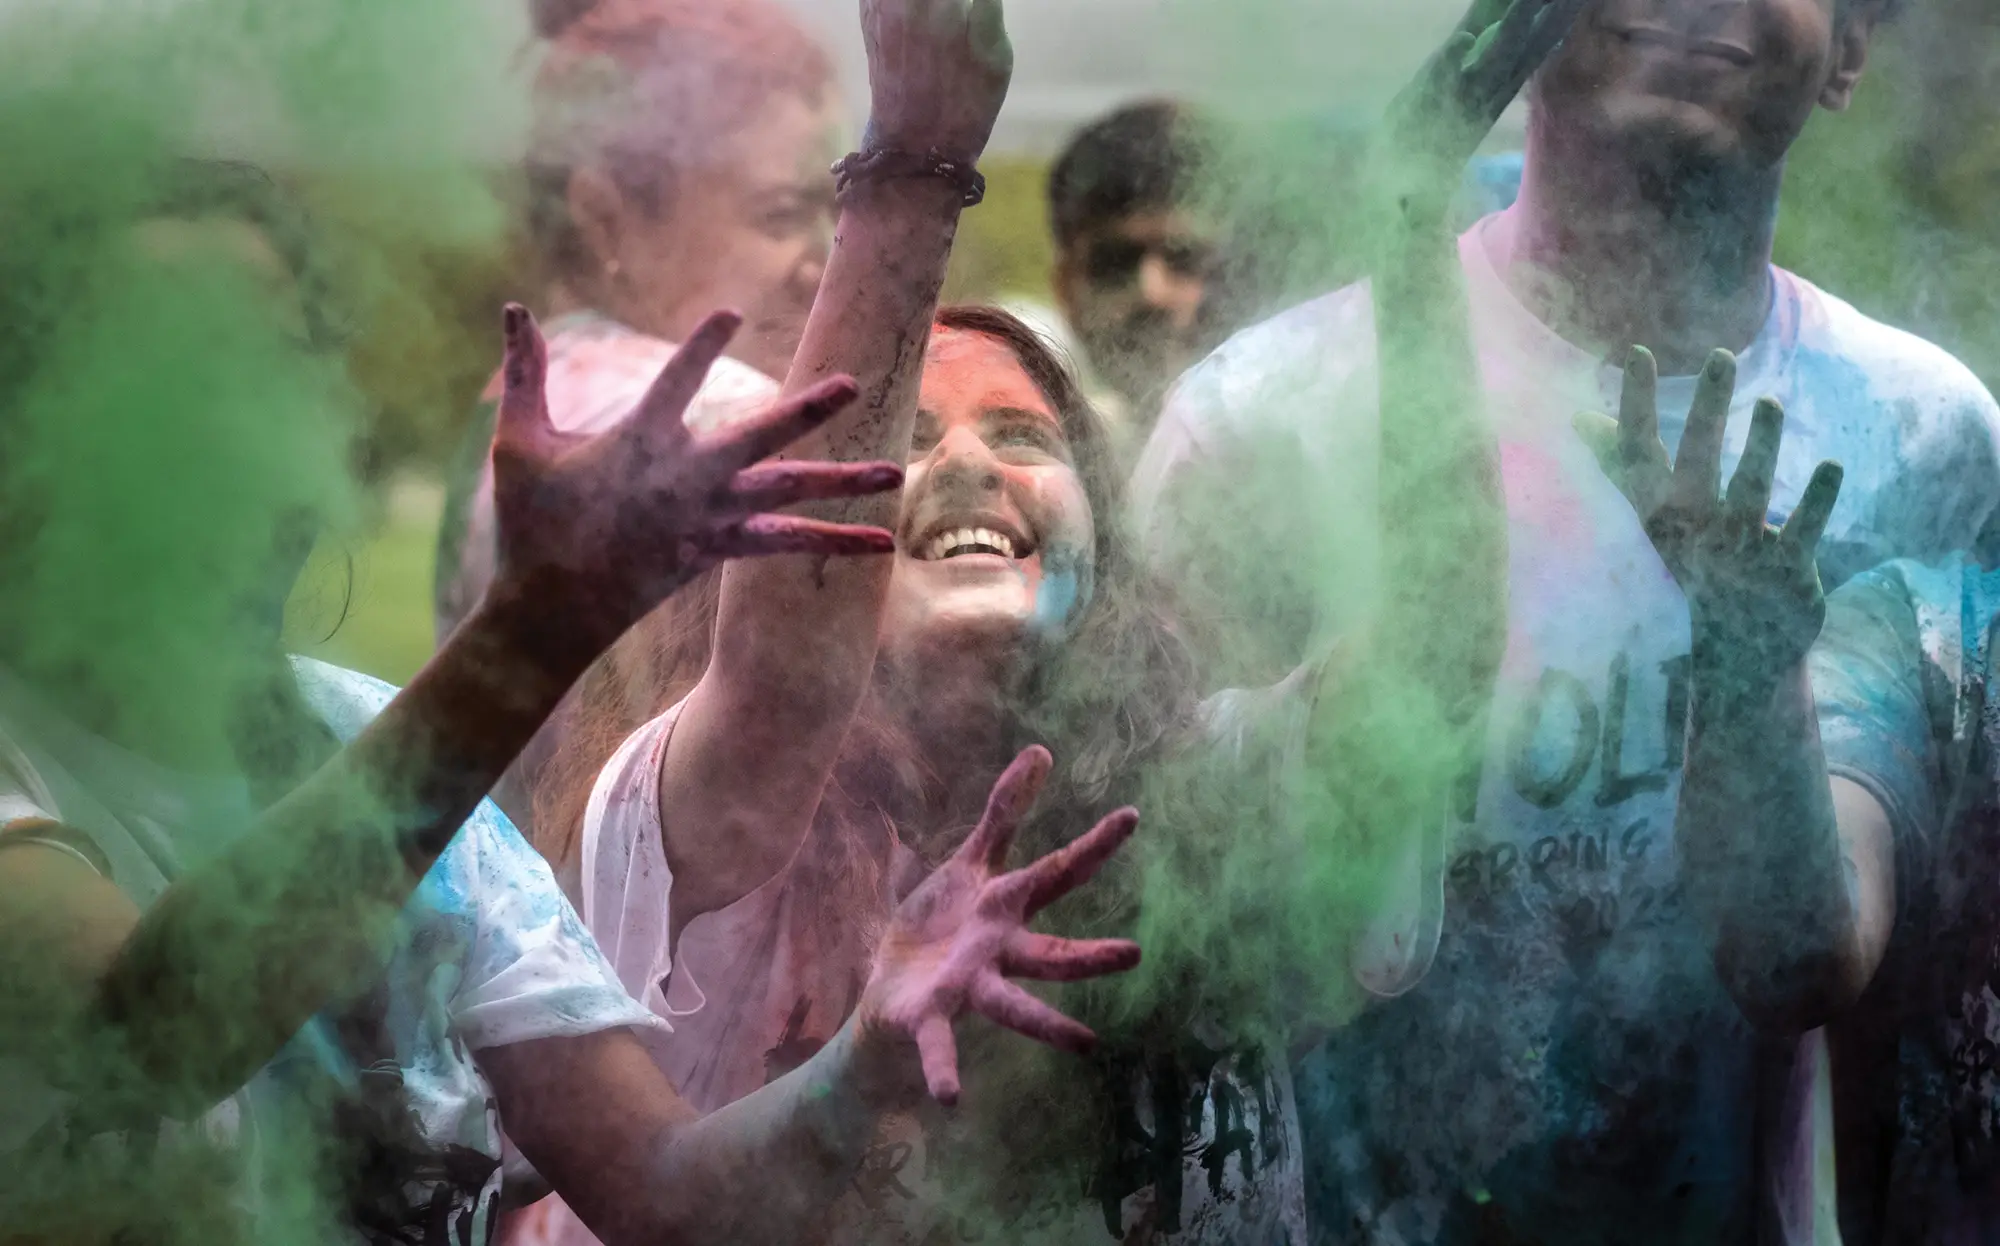 Students throwing up colored smoke